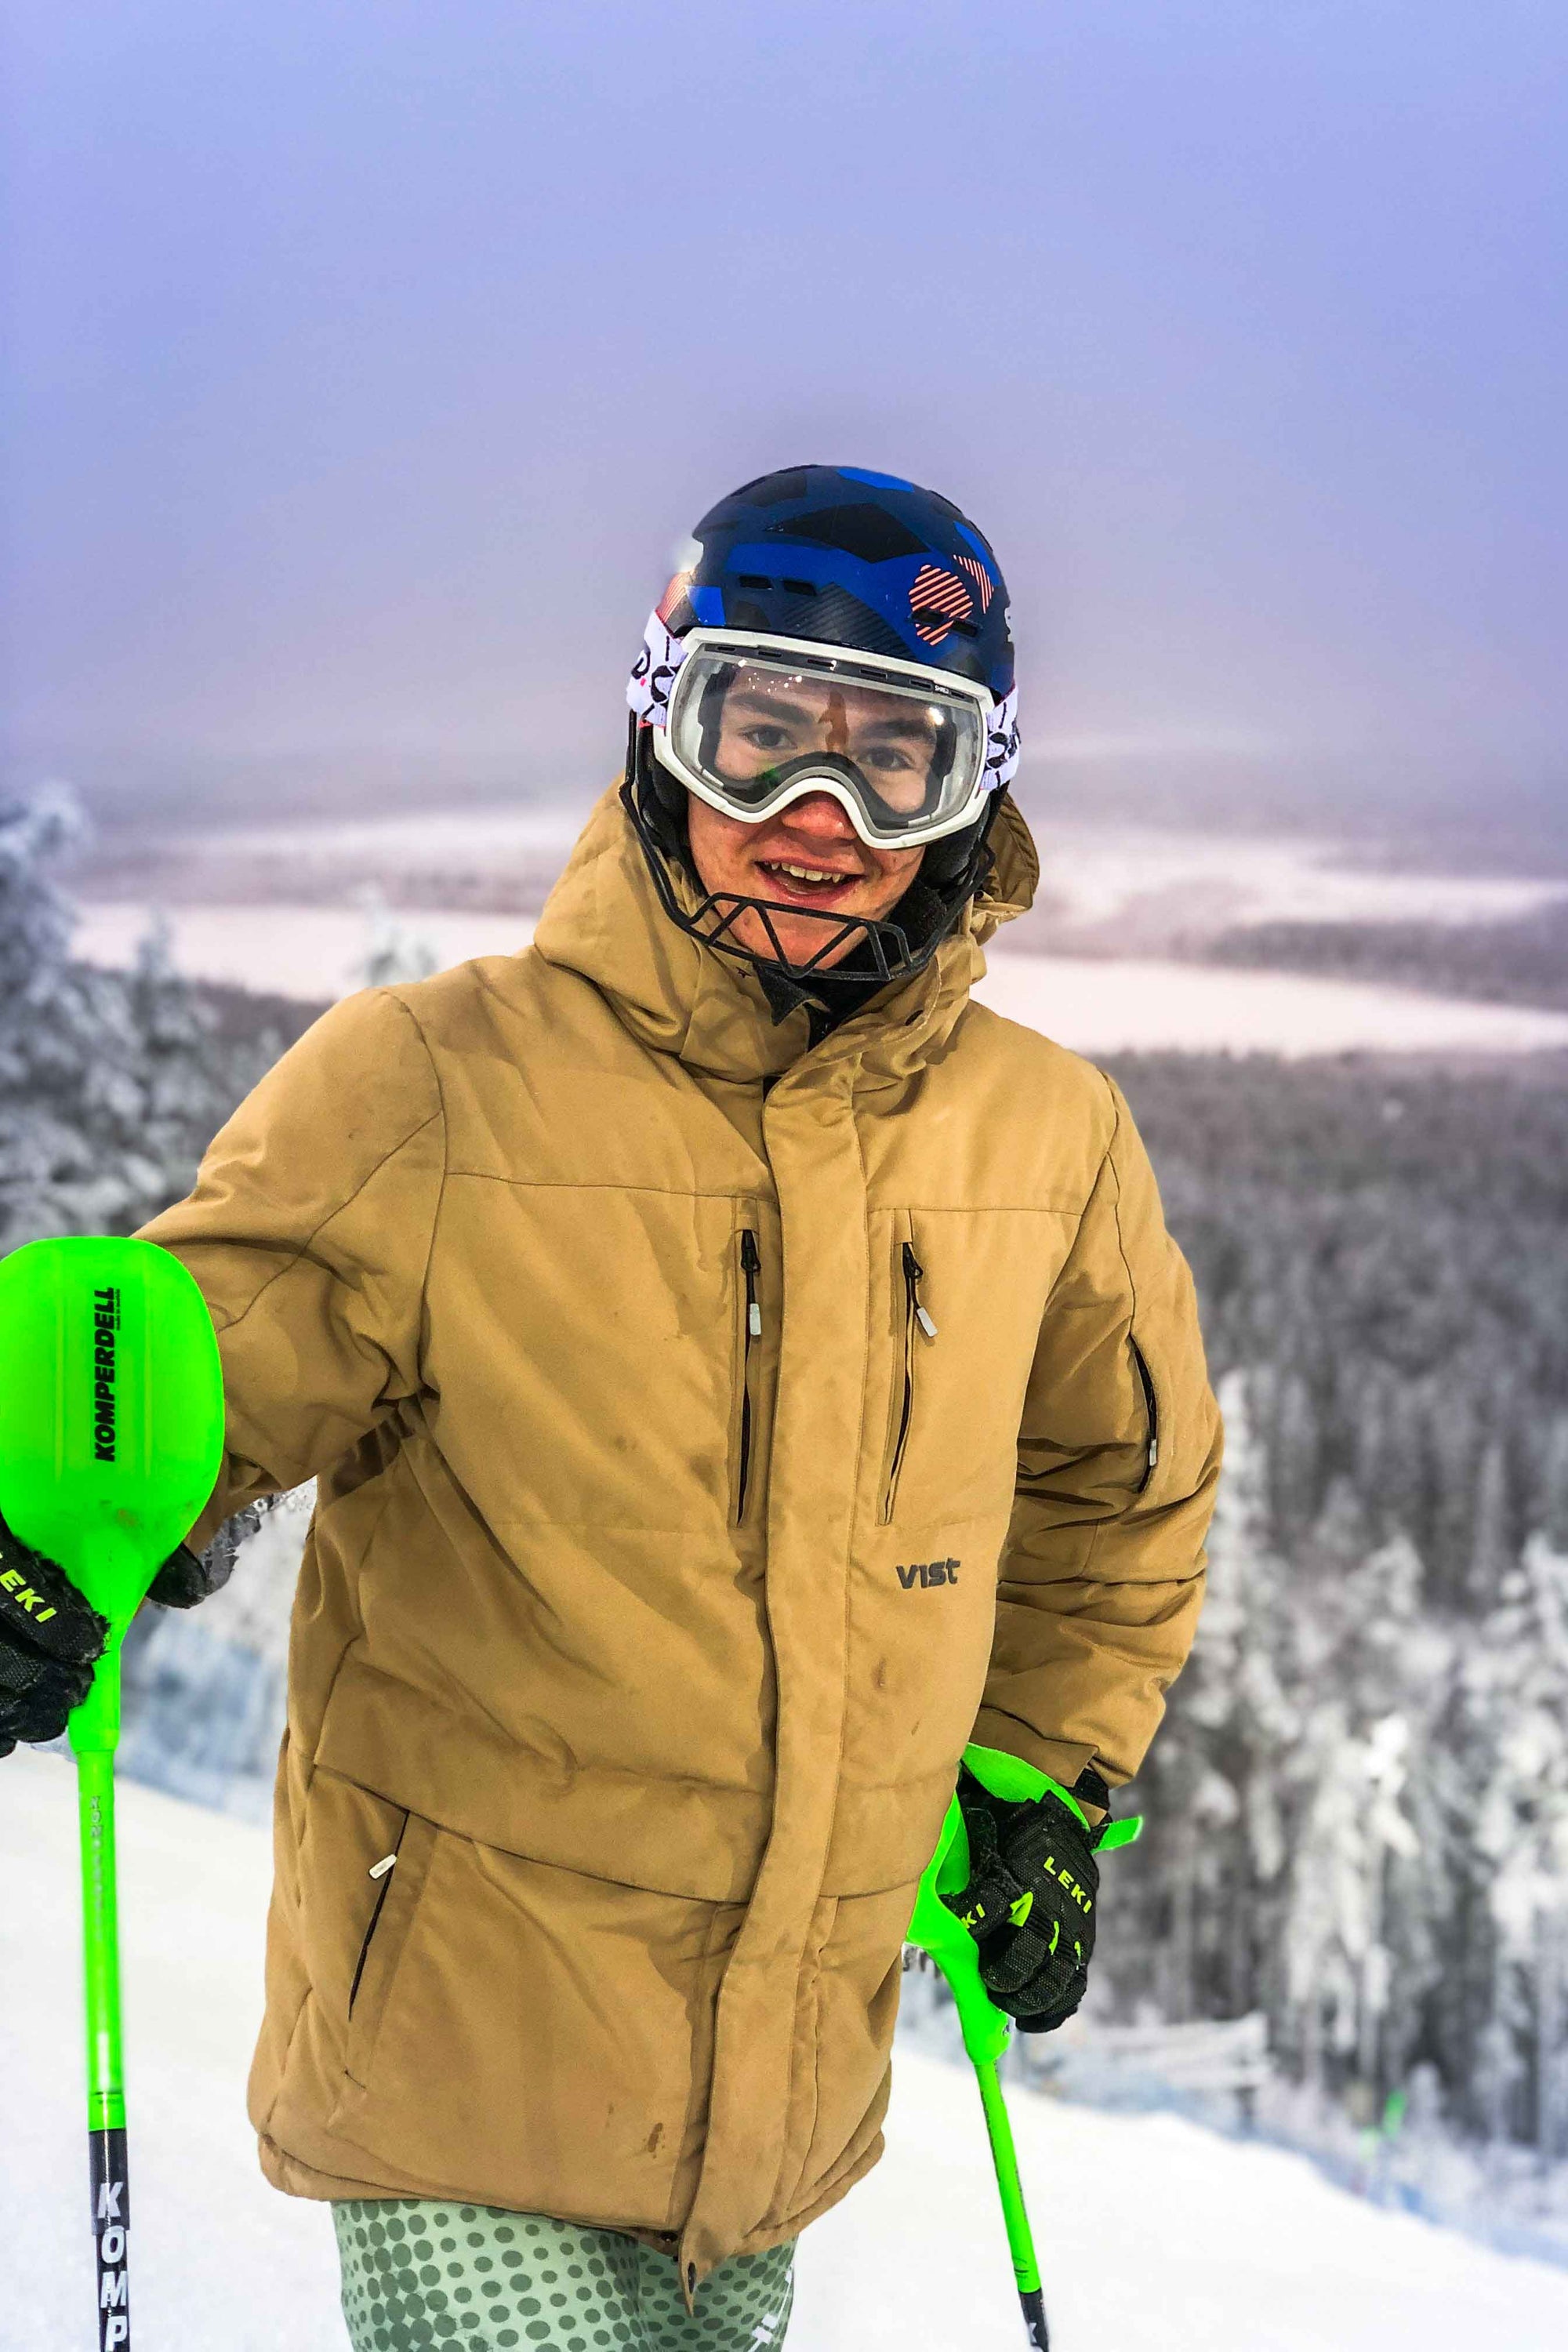 An interview with Tamas Trunk, a social media star, entrepreneur, and Hungary’s best male alpine skier.